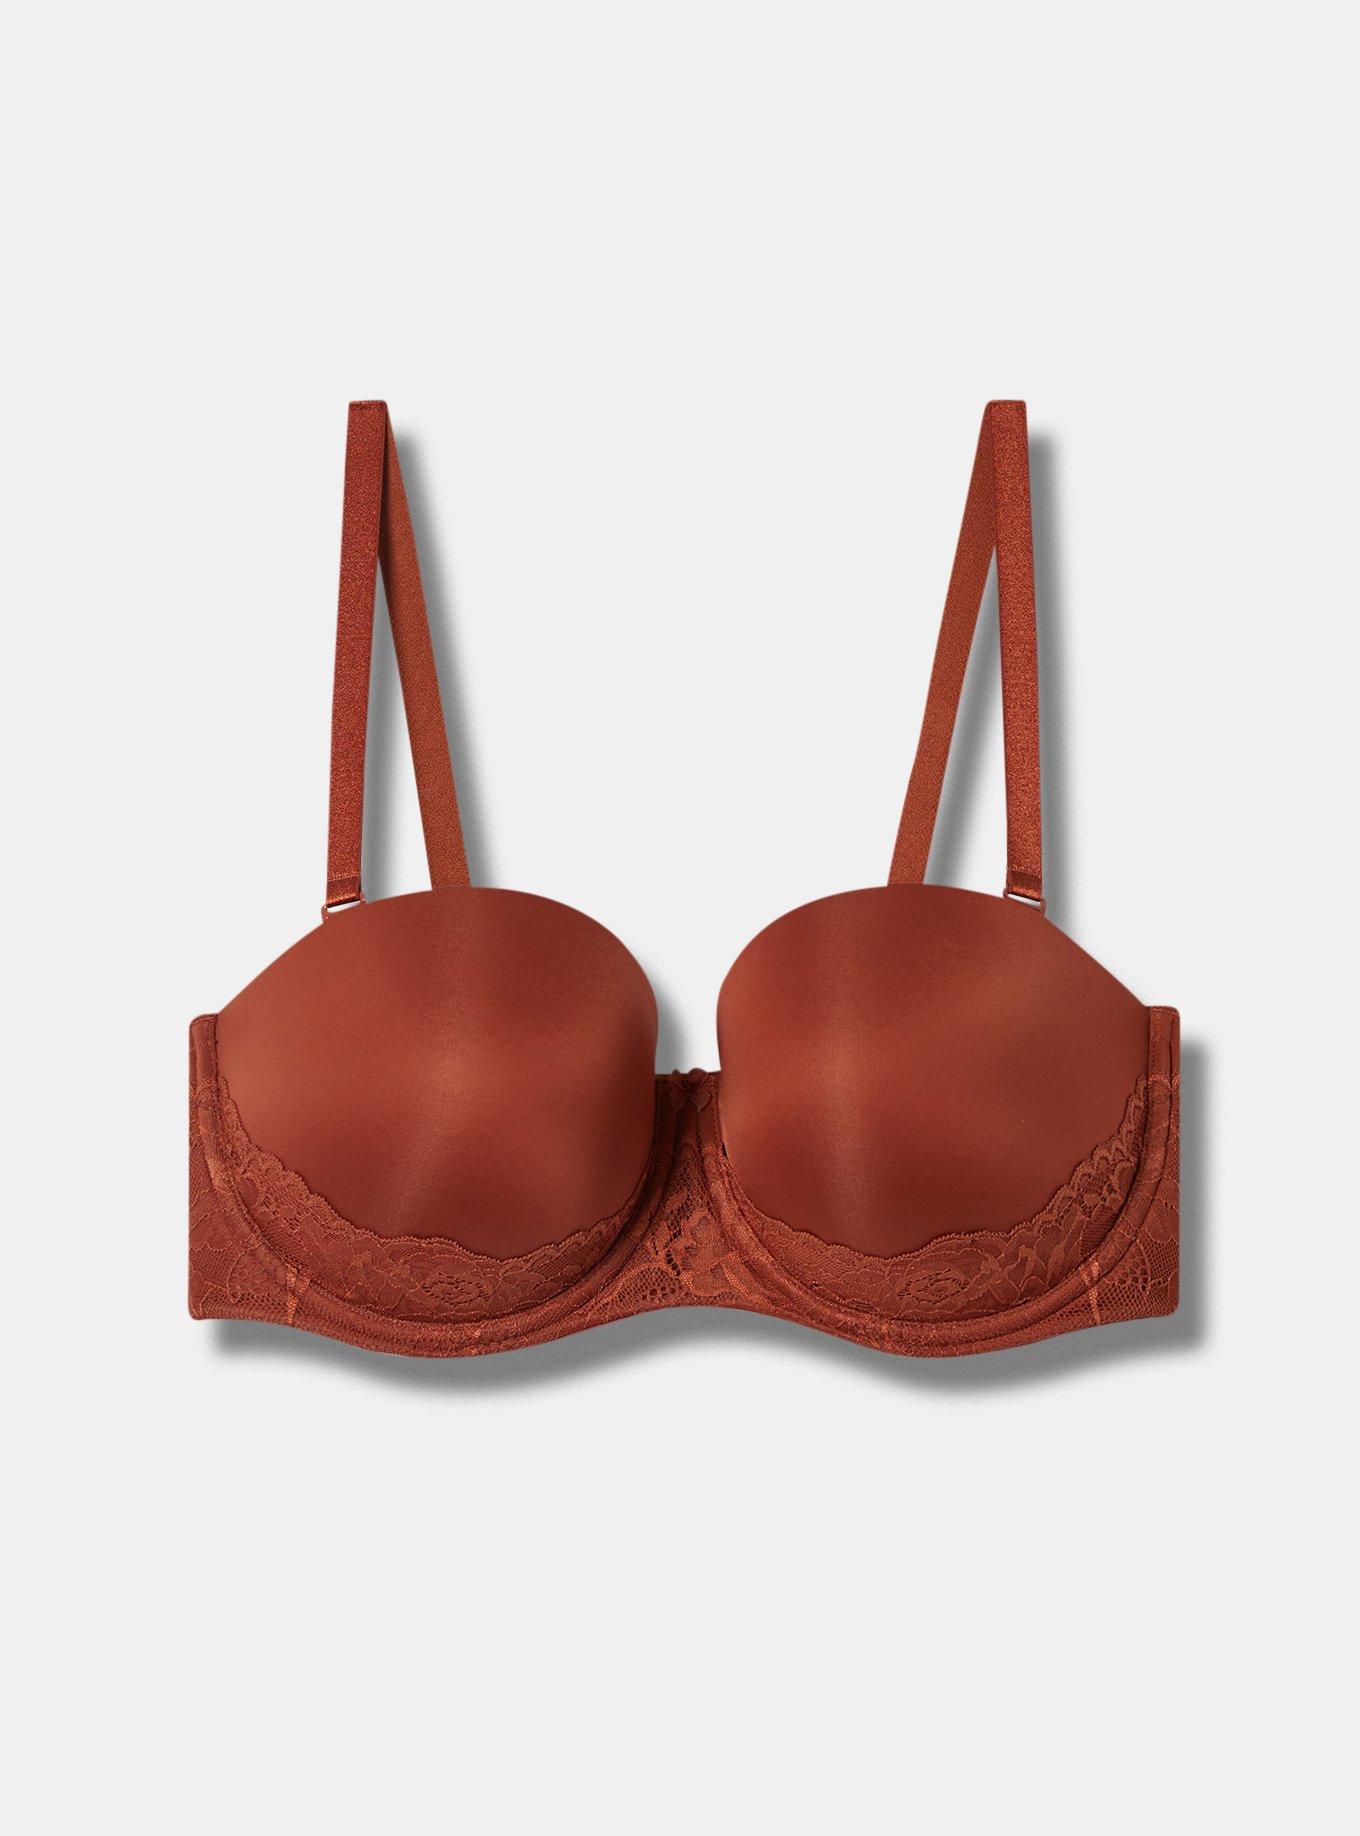 SEXY Red Lace Push Up Demi Bra 36C Removable Straps Strapless Valentines  Romance